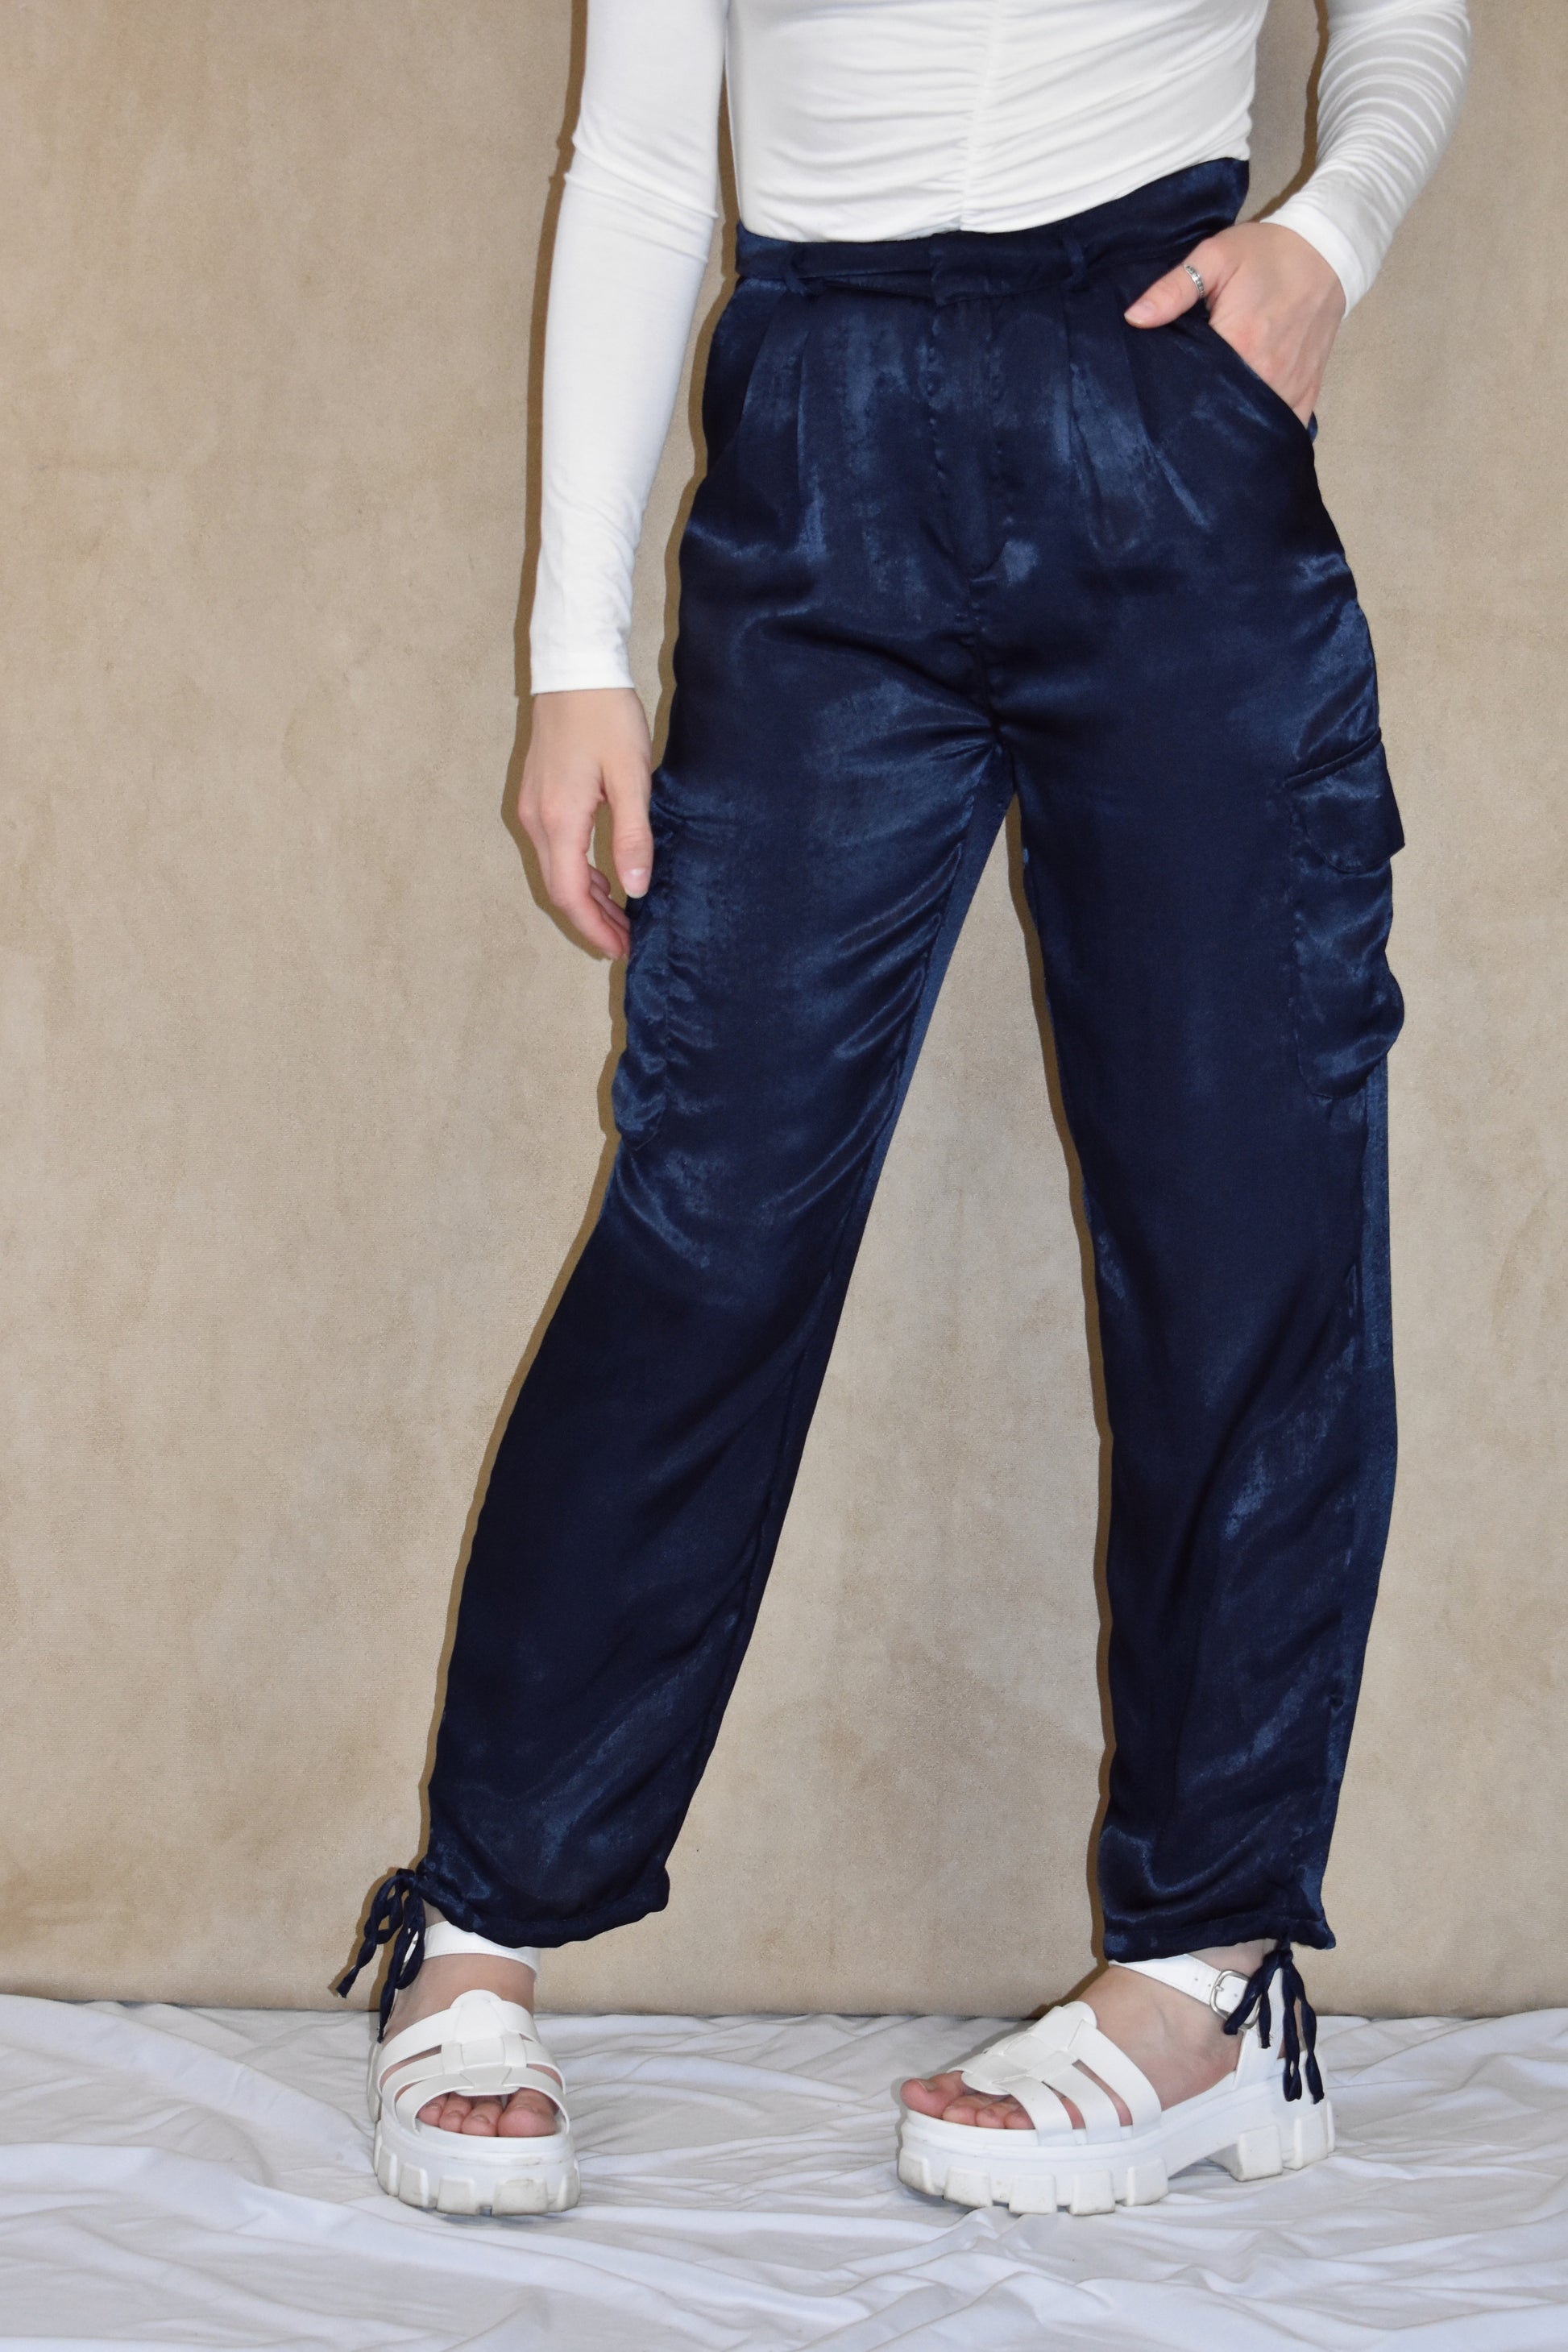 dark blue satin cargo pants. side pockets with top flap and drawstring on the bottom.